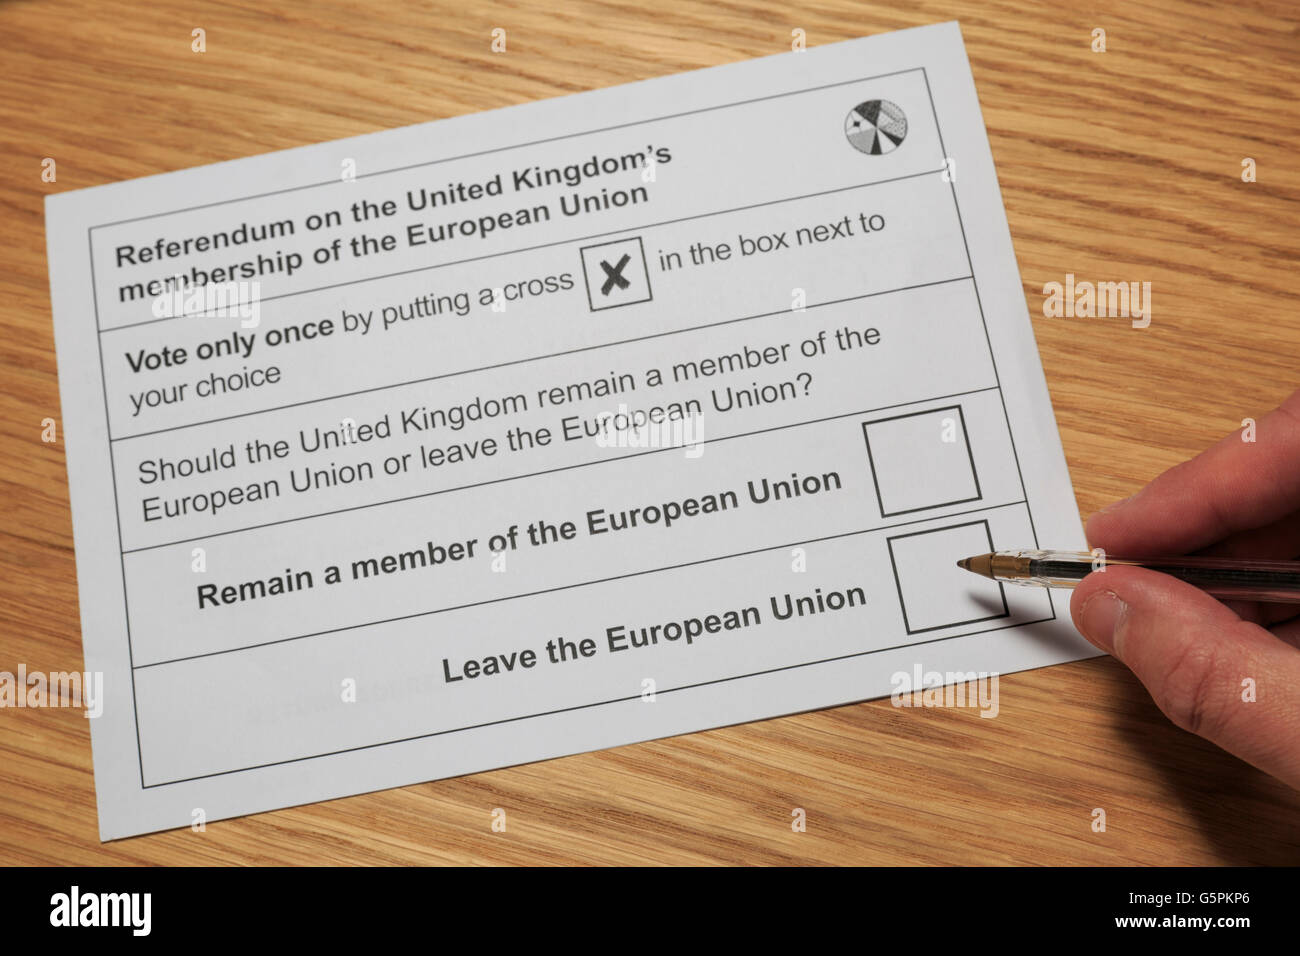 UK. 23 June 2016. EU Referendum. The Ballot Paper for the Referendum on the United Kingdom's membership of the European Union, which takes place today. A hand is poised to mark the option to 'Leave the European Union'. Stock Photo